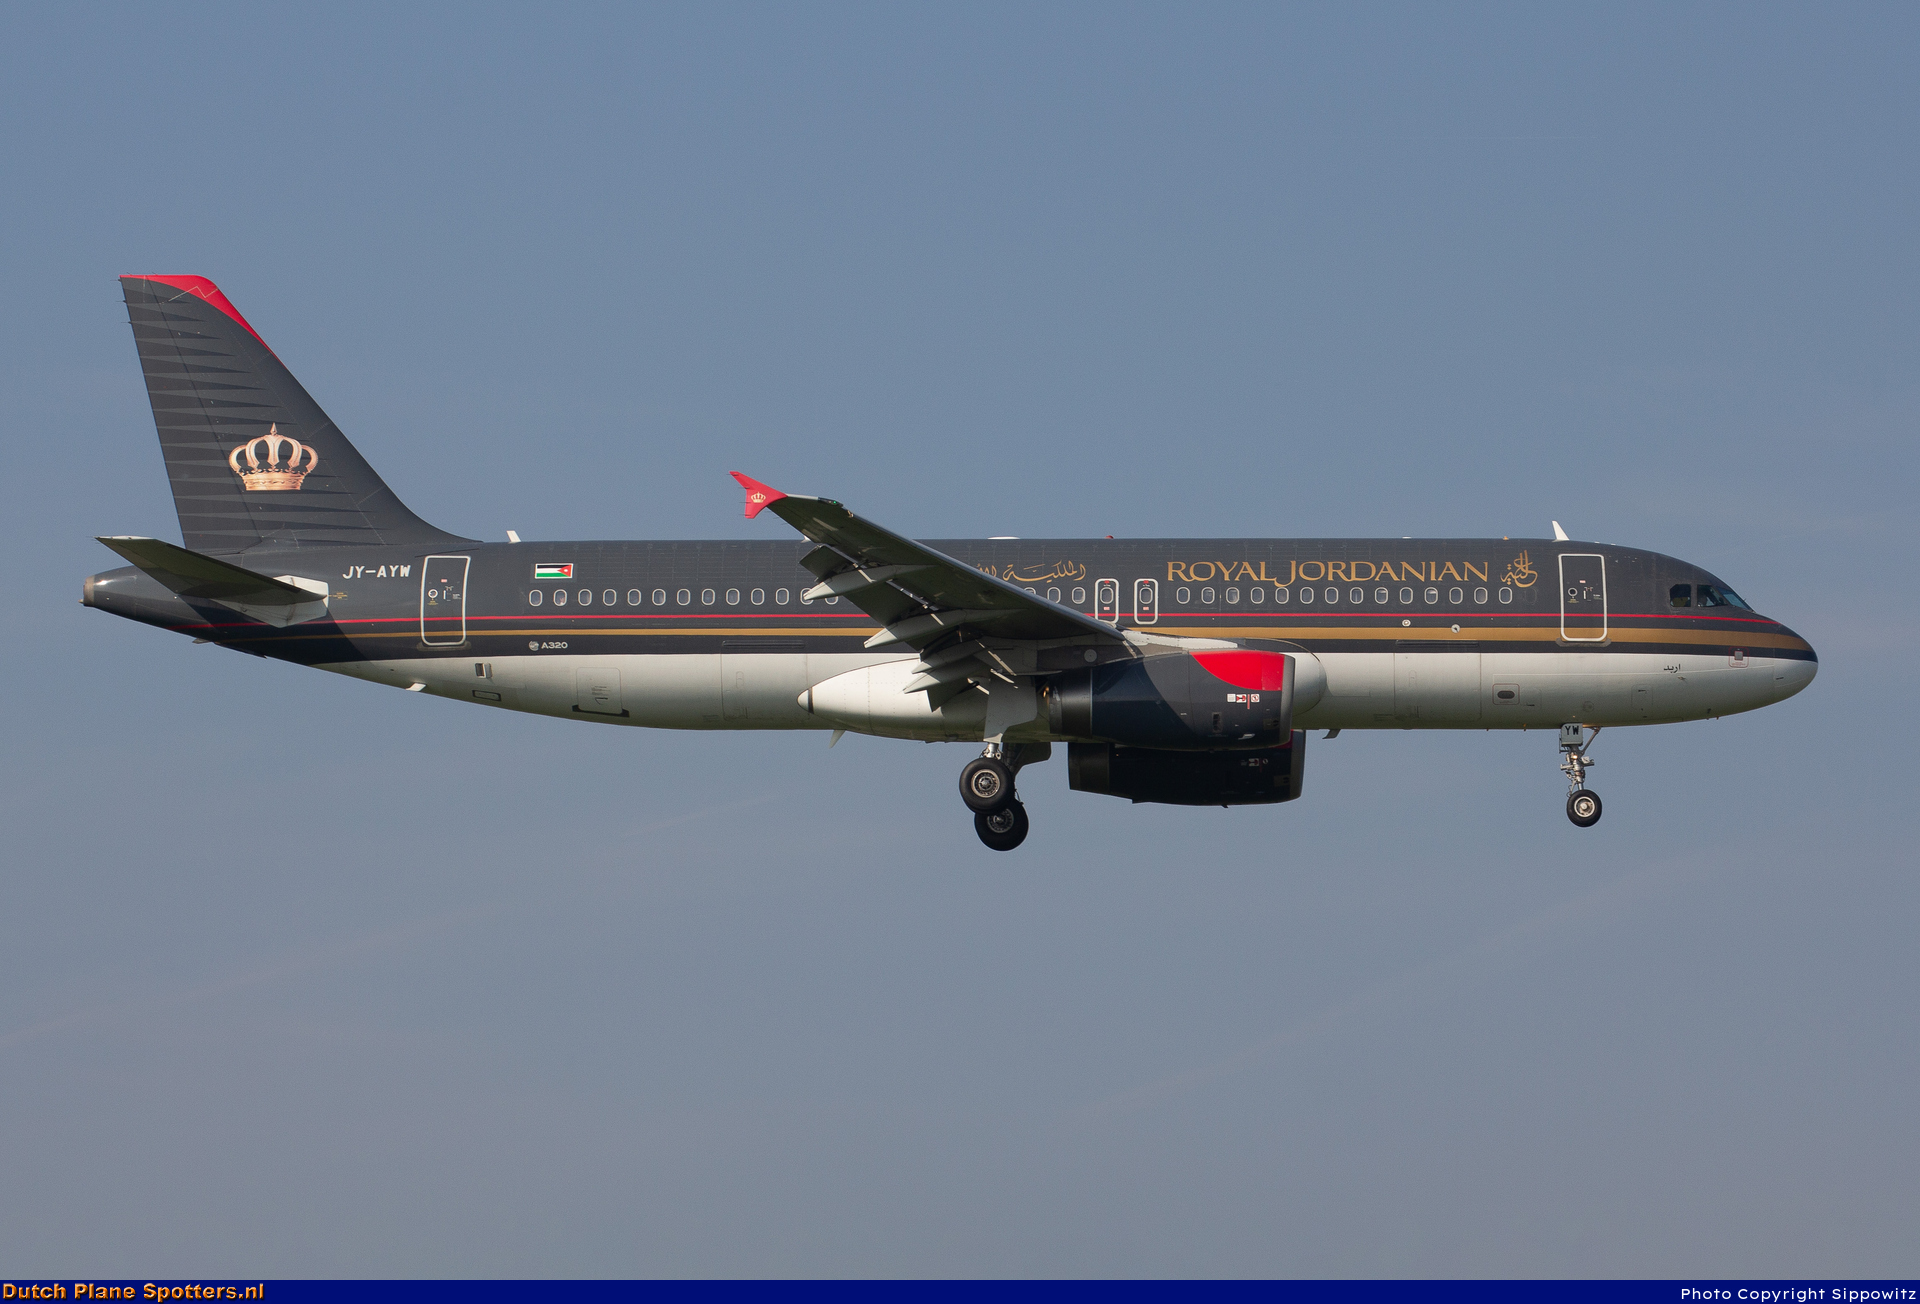 JY-AYW Airbus A320 Royal Jordanian Airlines by Sippowitz